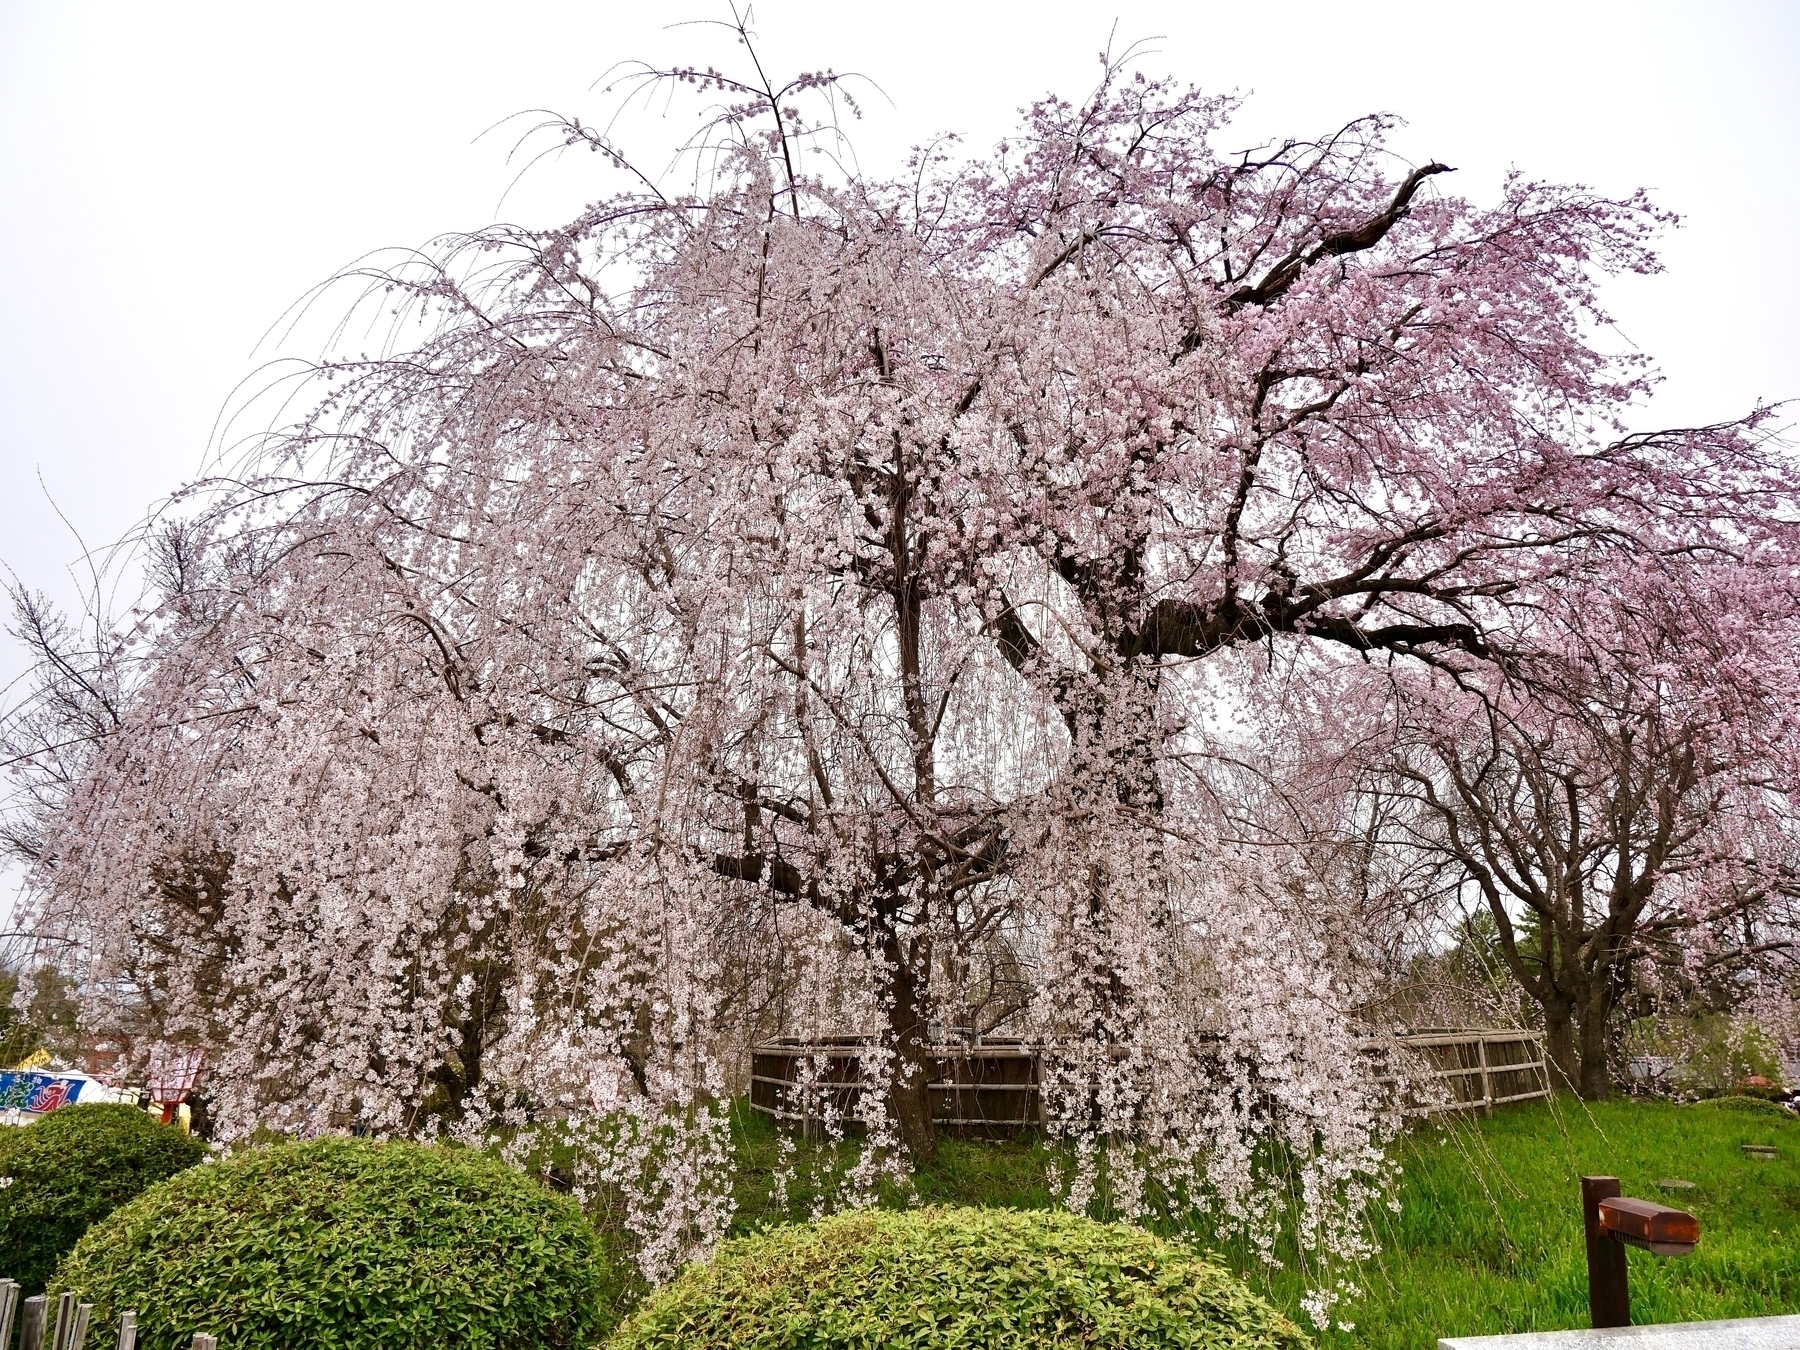 The old cherry blossom tree in Maruyama park. It is something like 170 years old, although it was recently trimmed and is much smaller than previous years